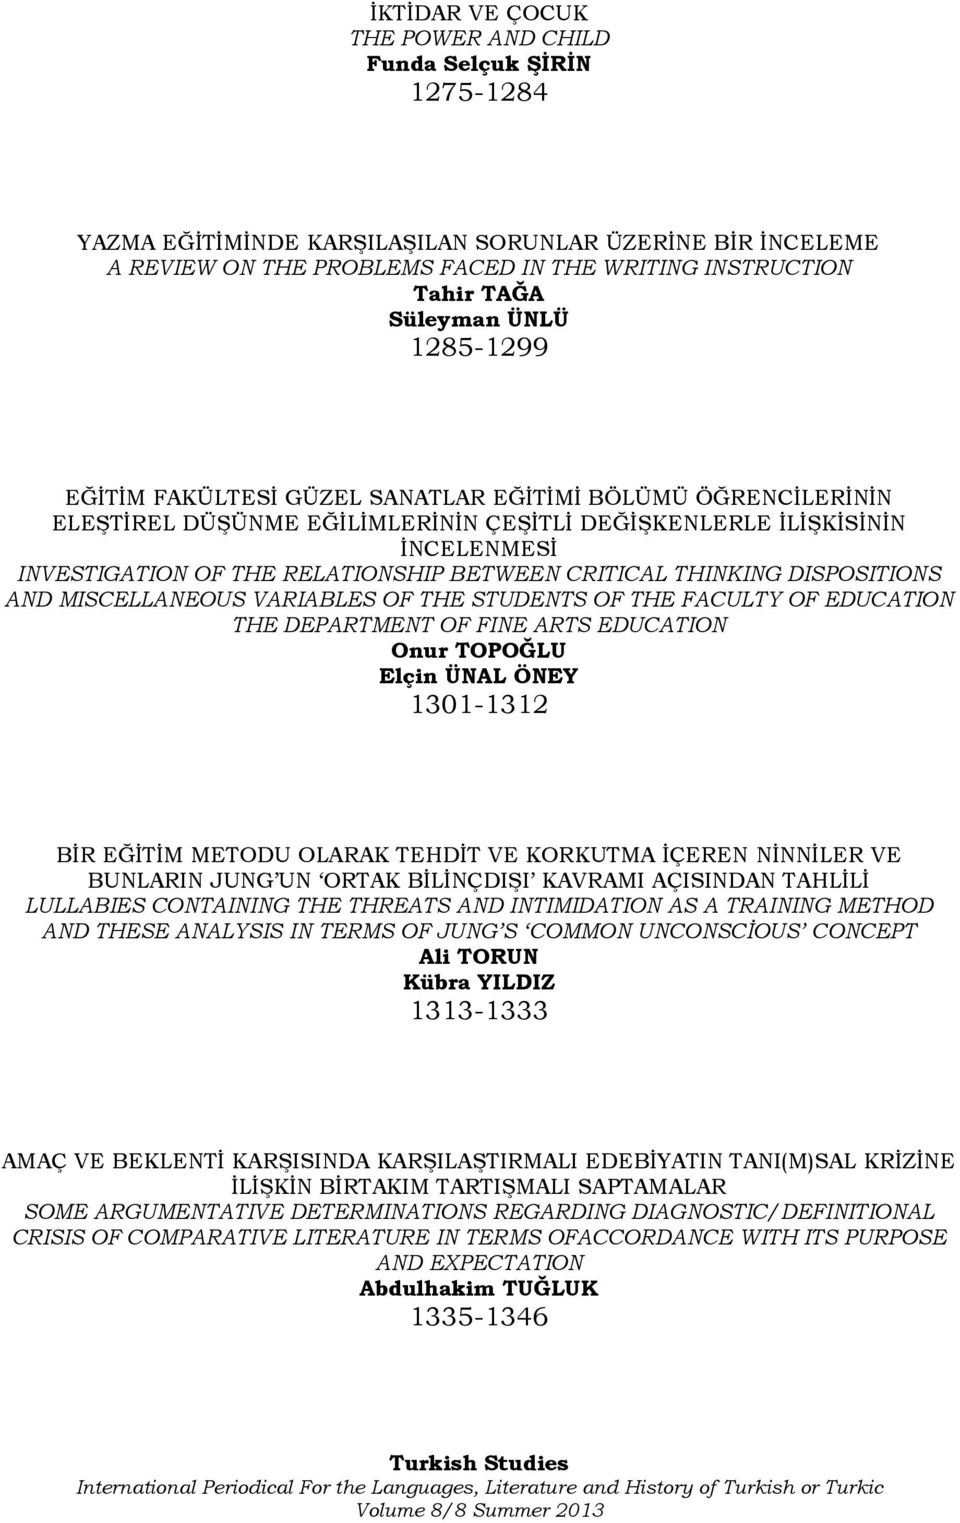 BETWEEN CRITICAL THINKING DISPOSITIONS AND MISCELLANEOUS VARIABLES OF THE STUDENTS OF THE FACULTY OF EDUCATION THE DEPARTMENT OF FINE ARTS EDUCATION Onur TOPOĞLU Elçin ÜNAL ÖNEY 1301-1312 BİR EĞİTİM